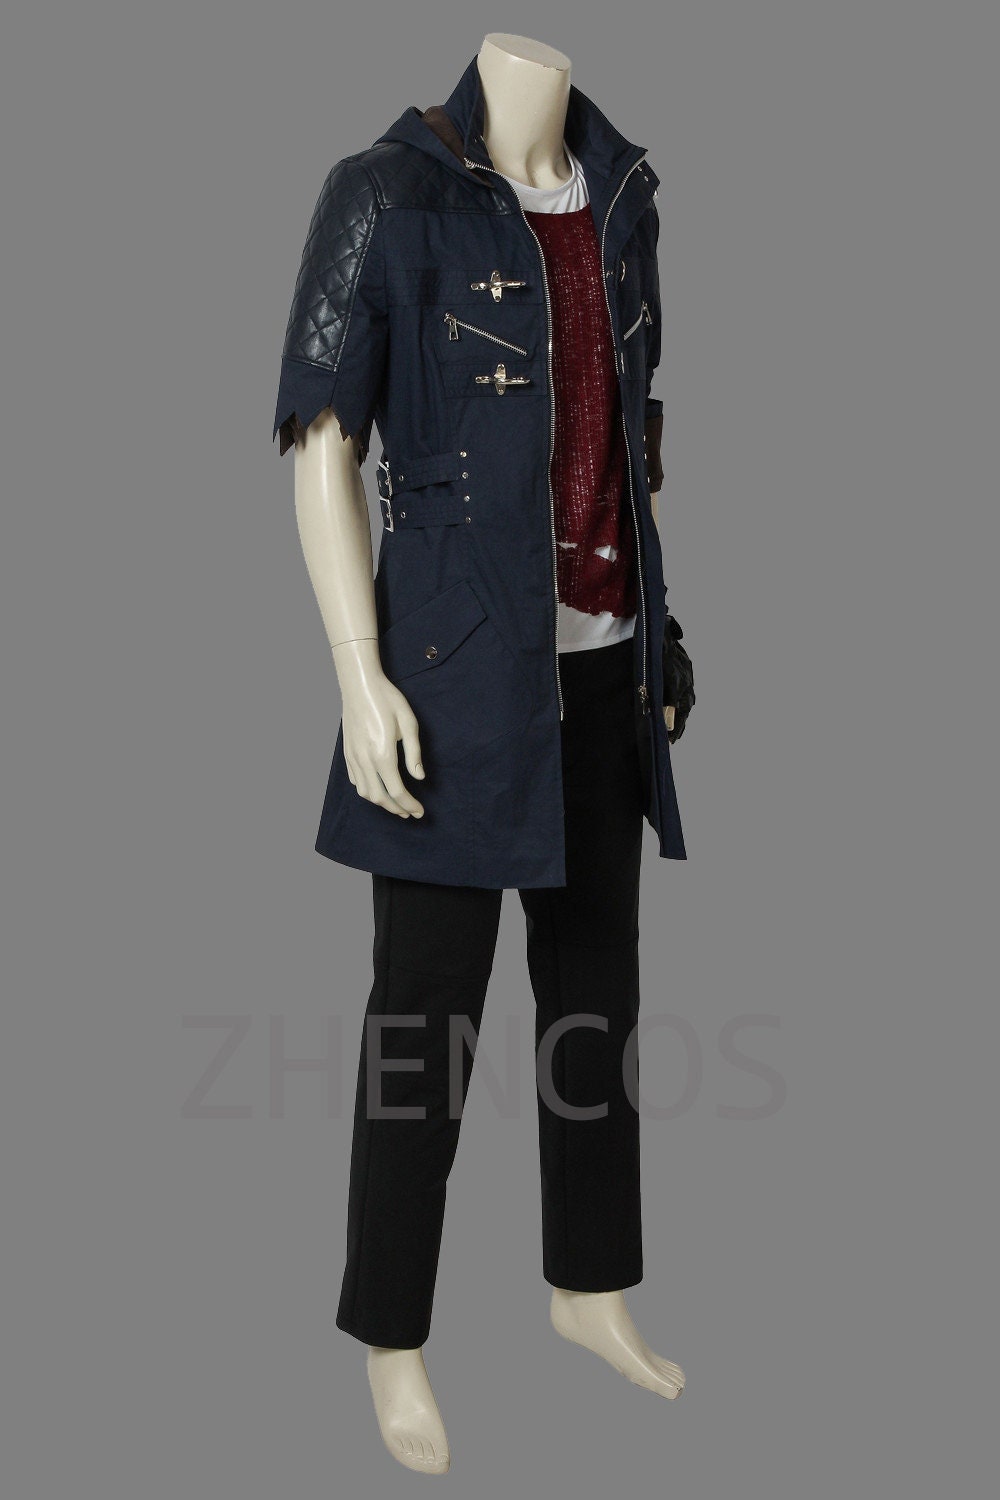 Vergil from Devil May Cry 5 Costume, Carbon Costume